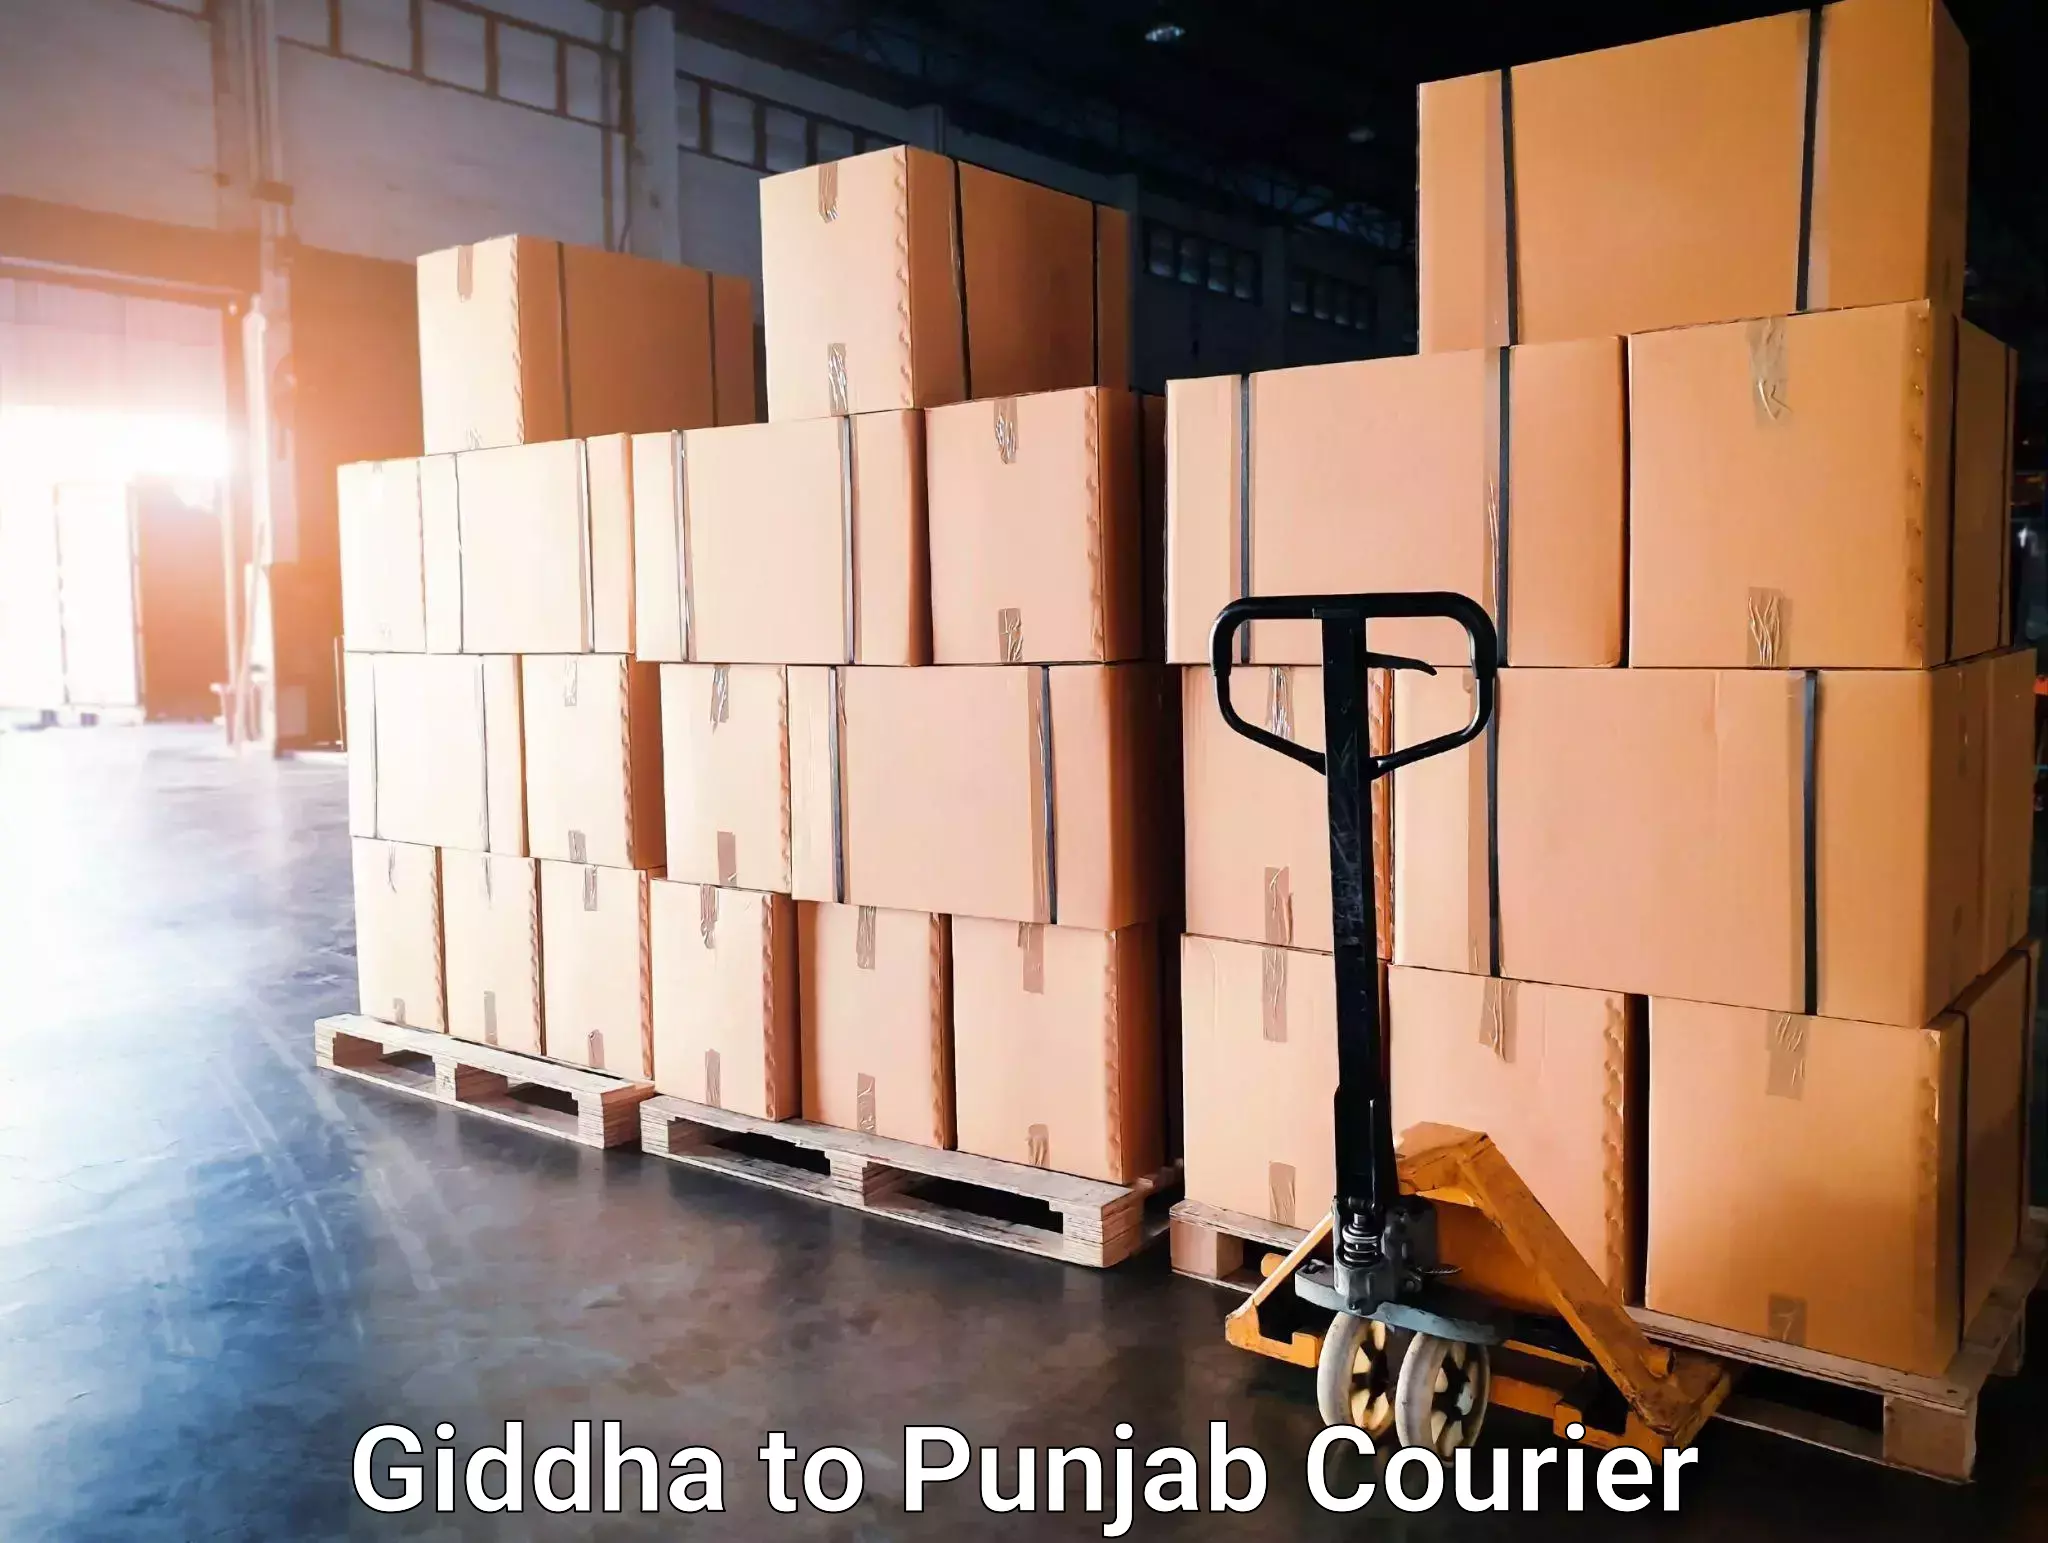 Hassle-free relocation Giddha to Amritsar